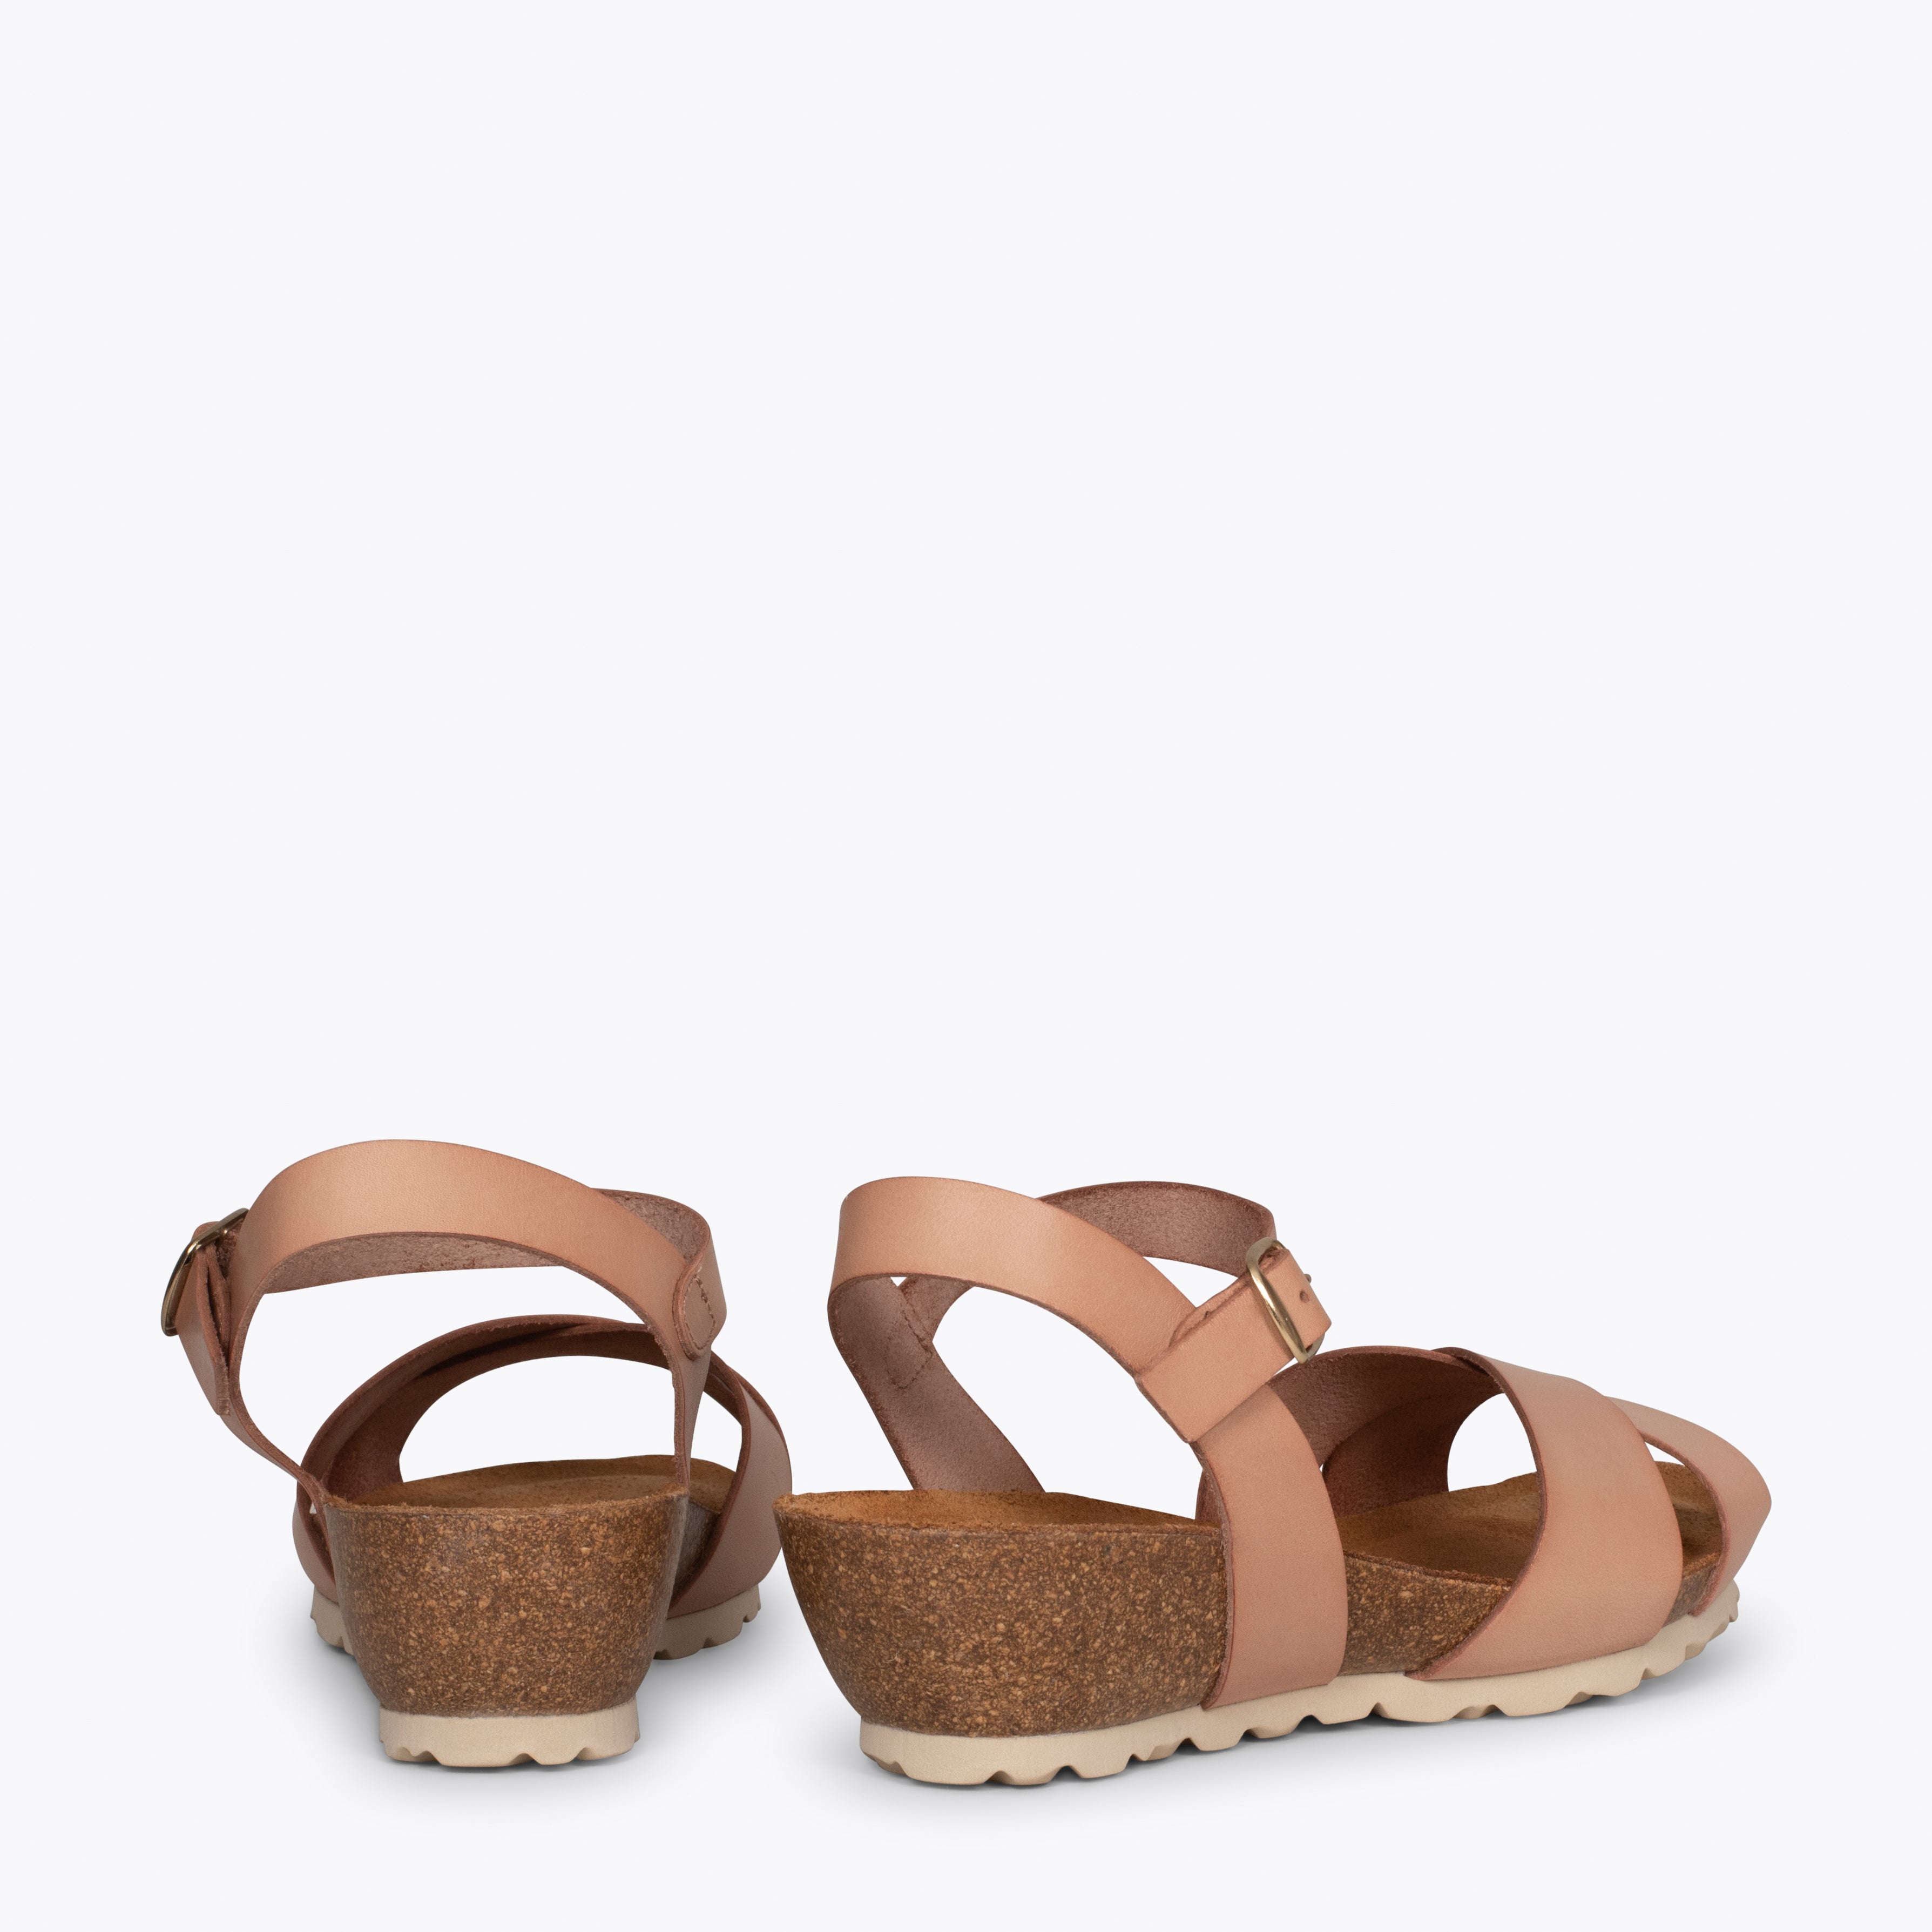 LOTO – NUDE wedge sandals with BIO sole